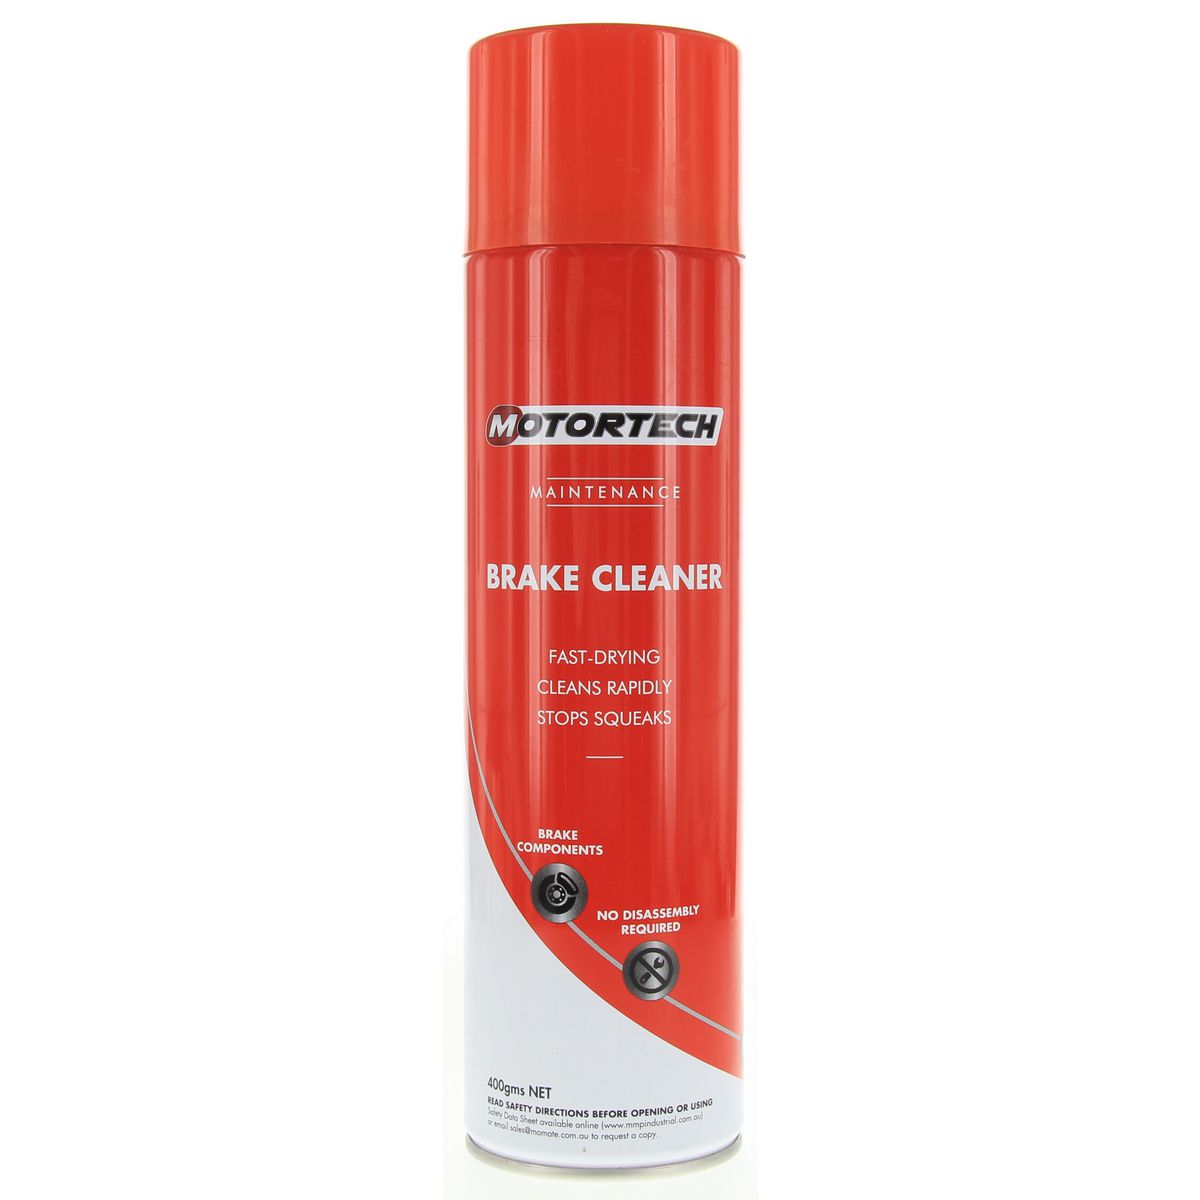 Motortech Brake Cleaner 400g - MT200/12 - South East Clearance Centre